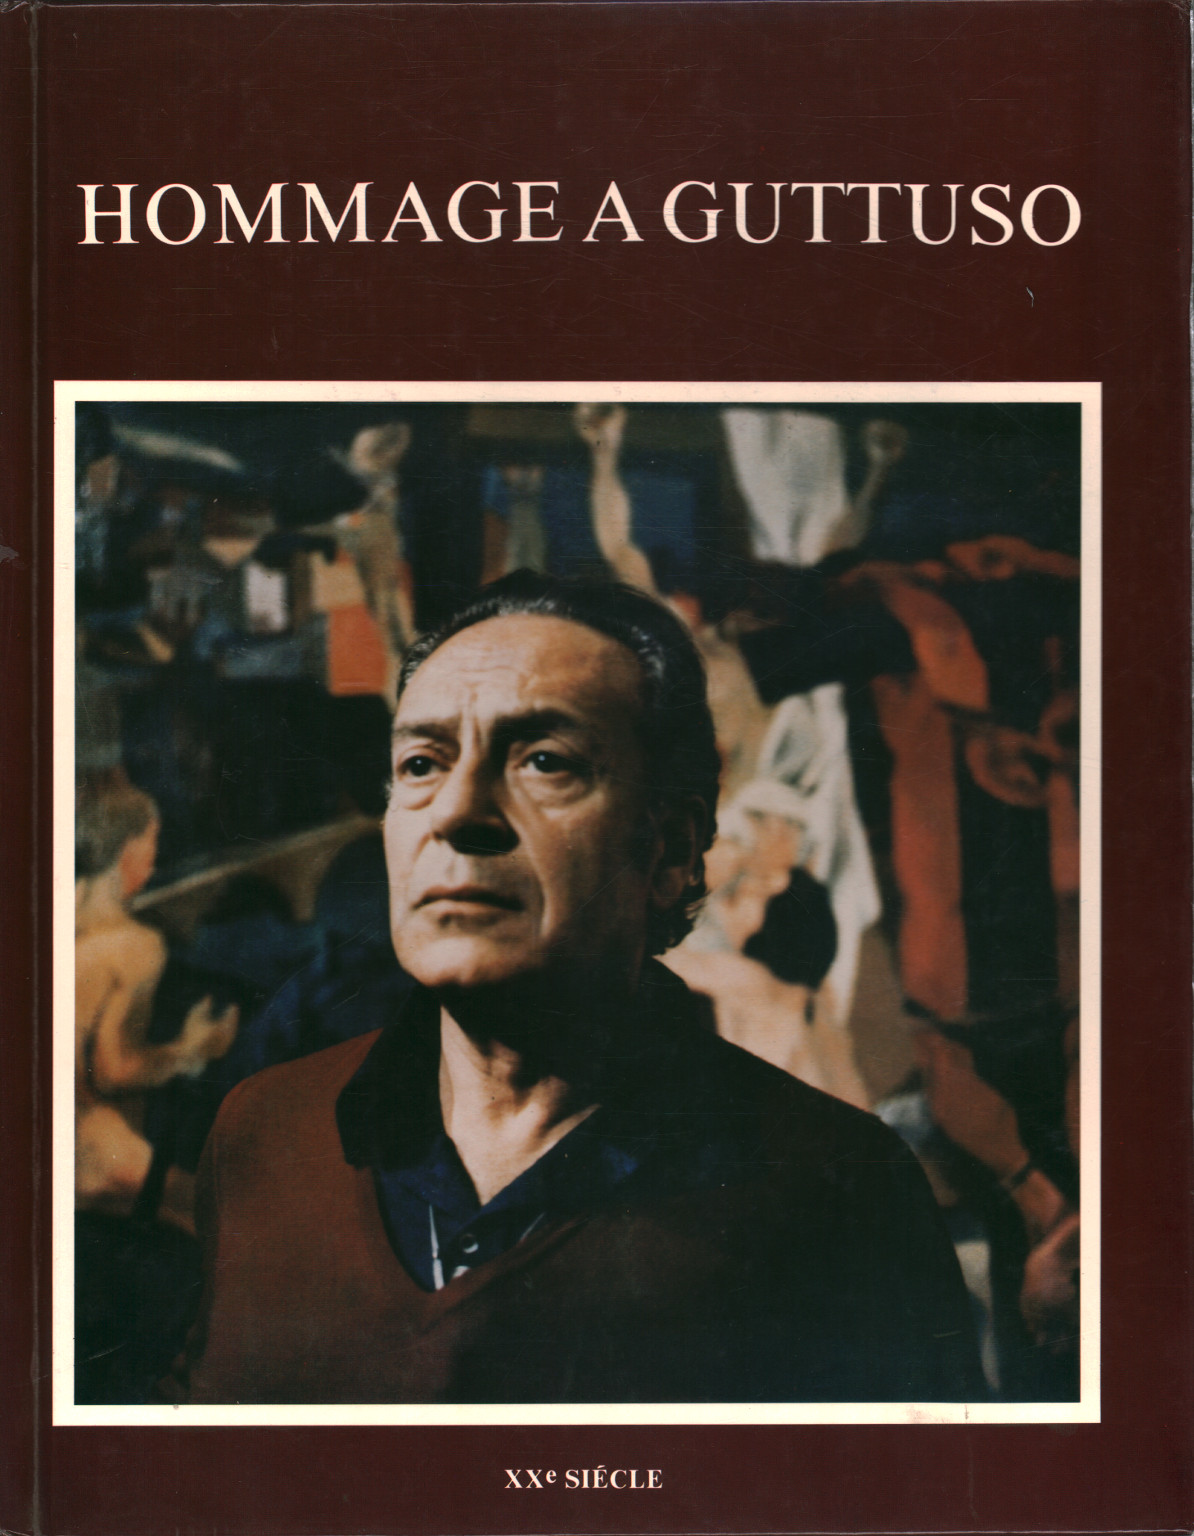 Hommage to Guttuso, AA.VV